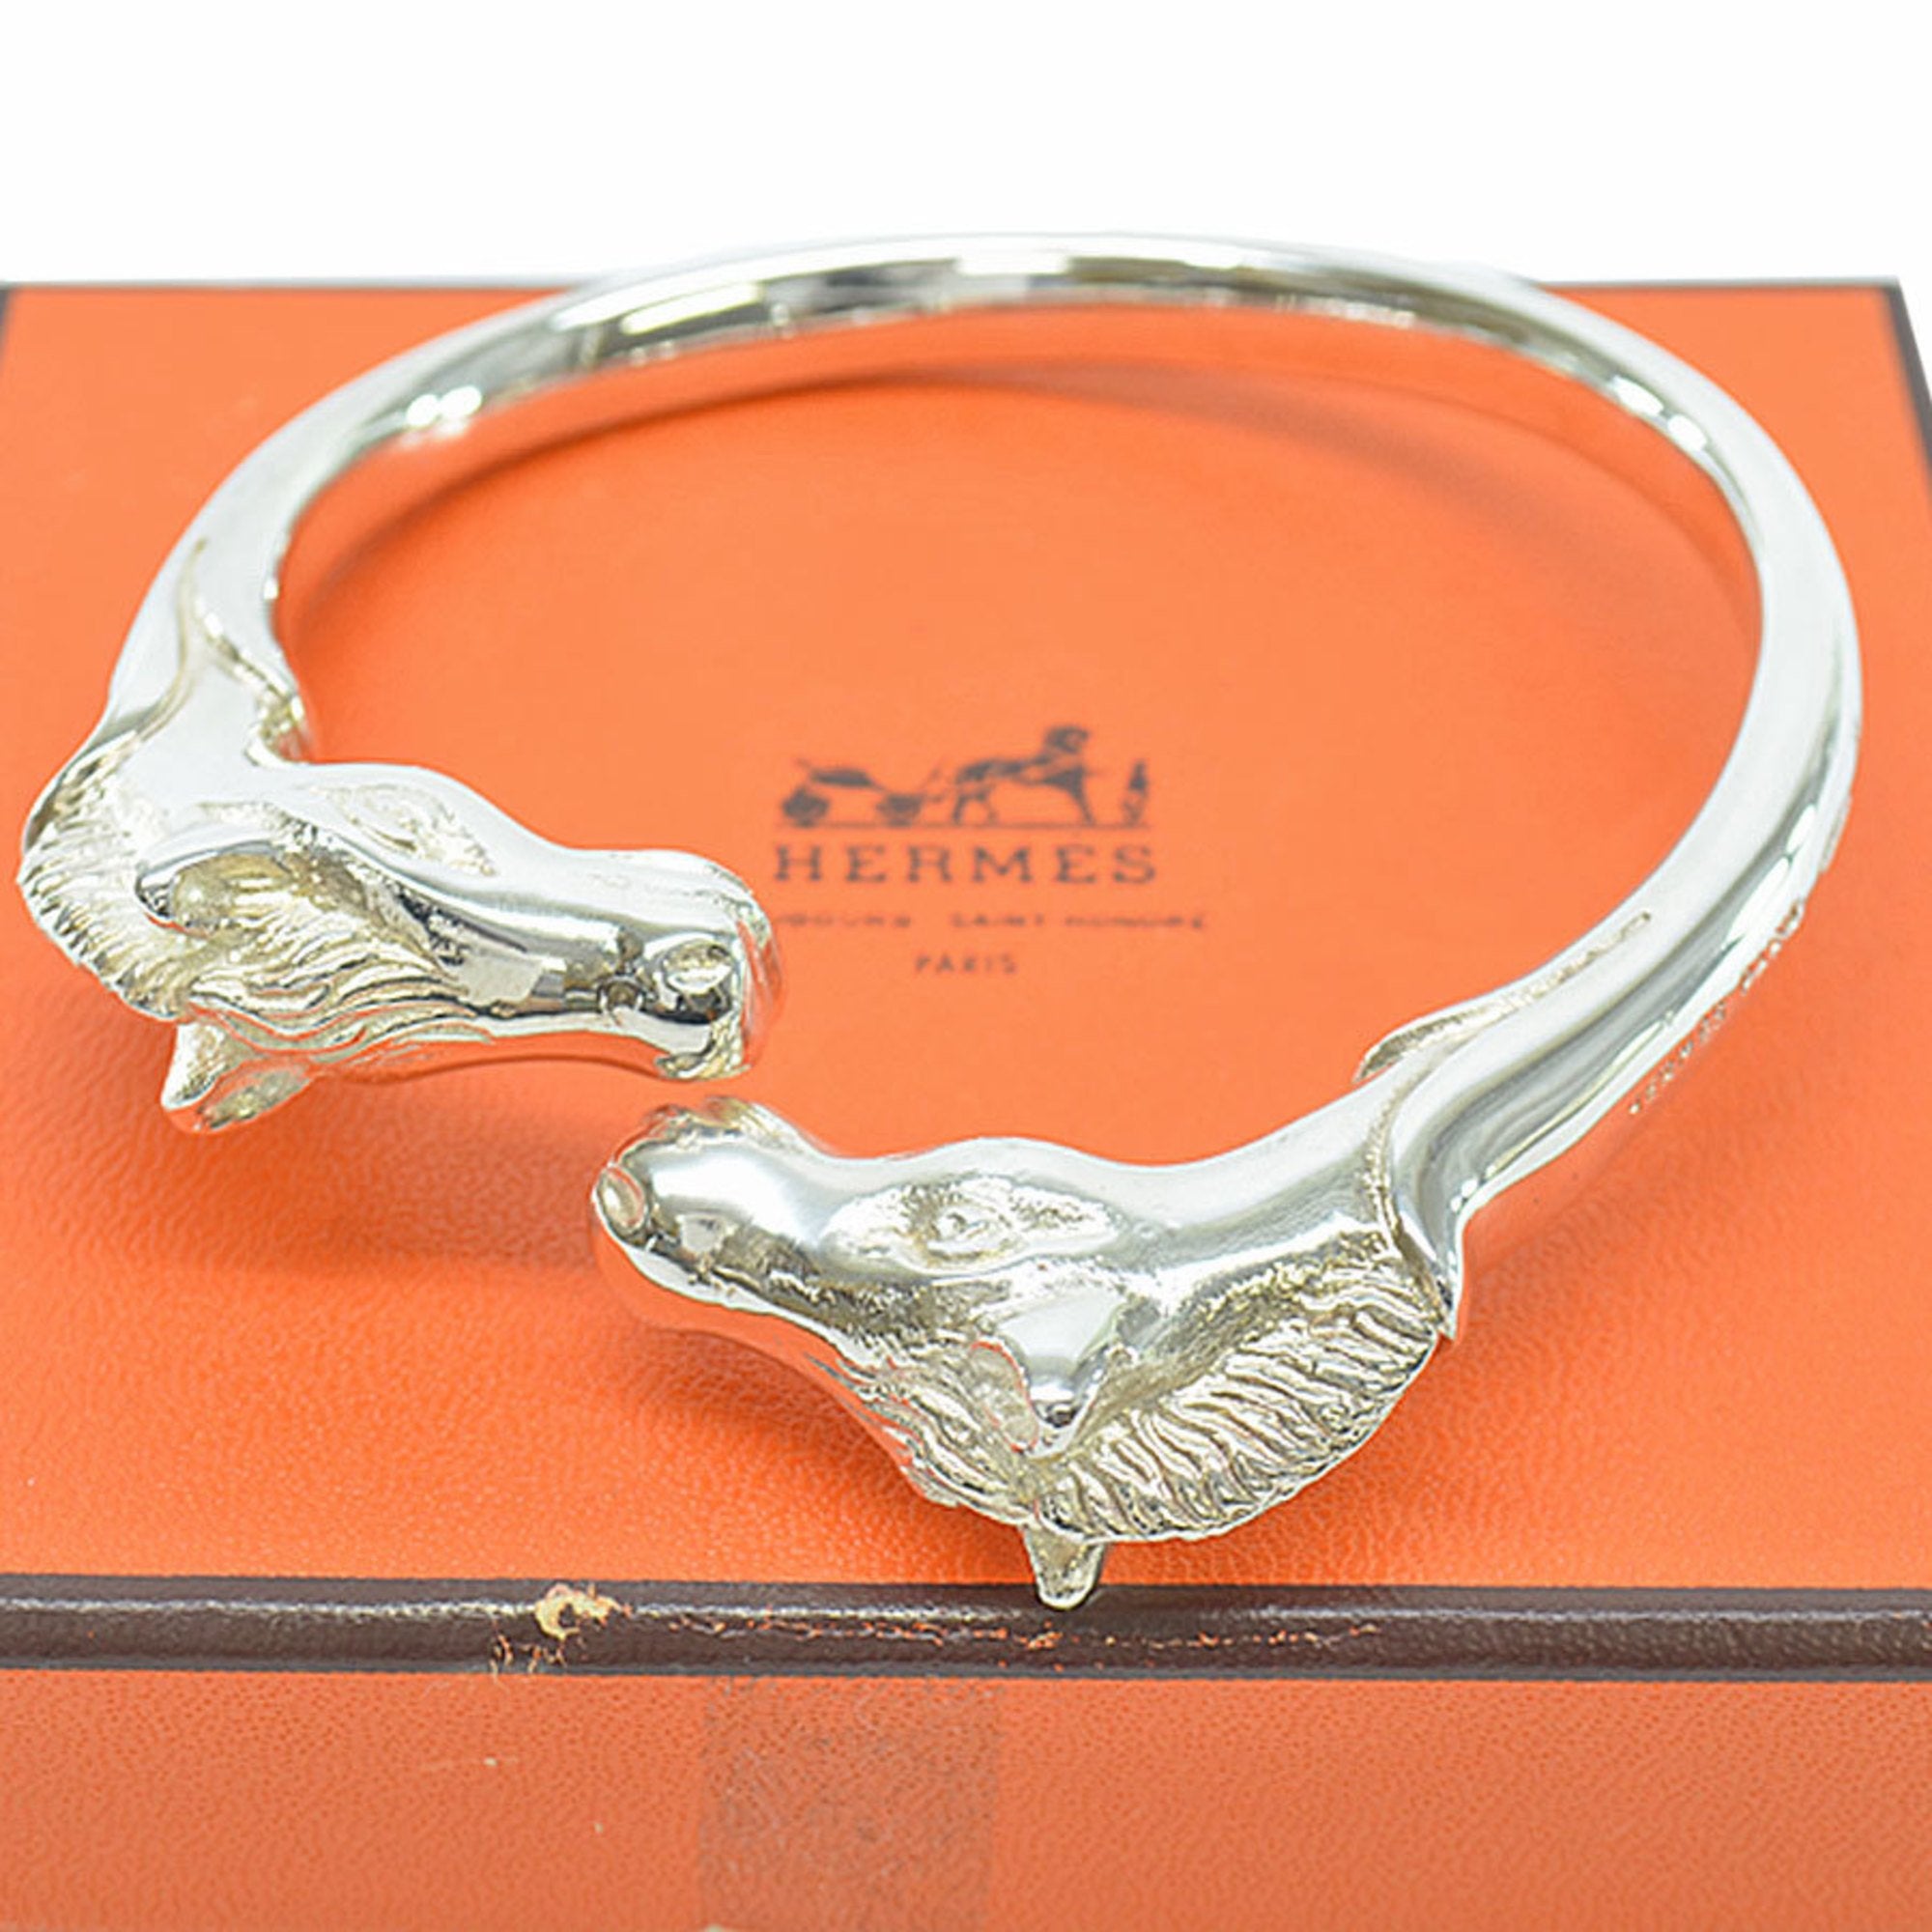 HERMES Bangle Open Bracelet Cheval Horse Head Silver Tone Metal with Box  Auth